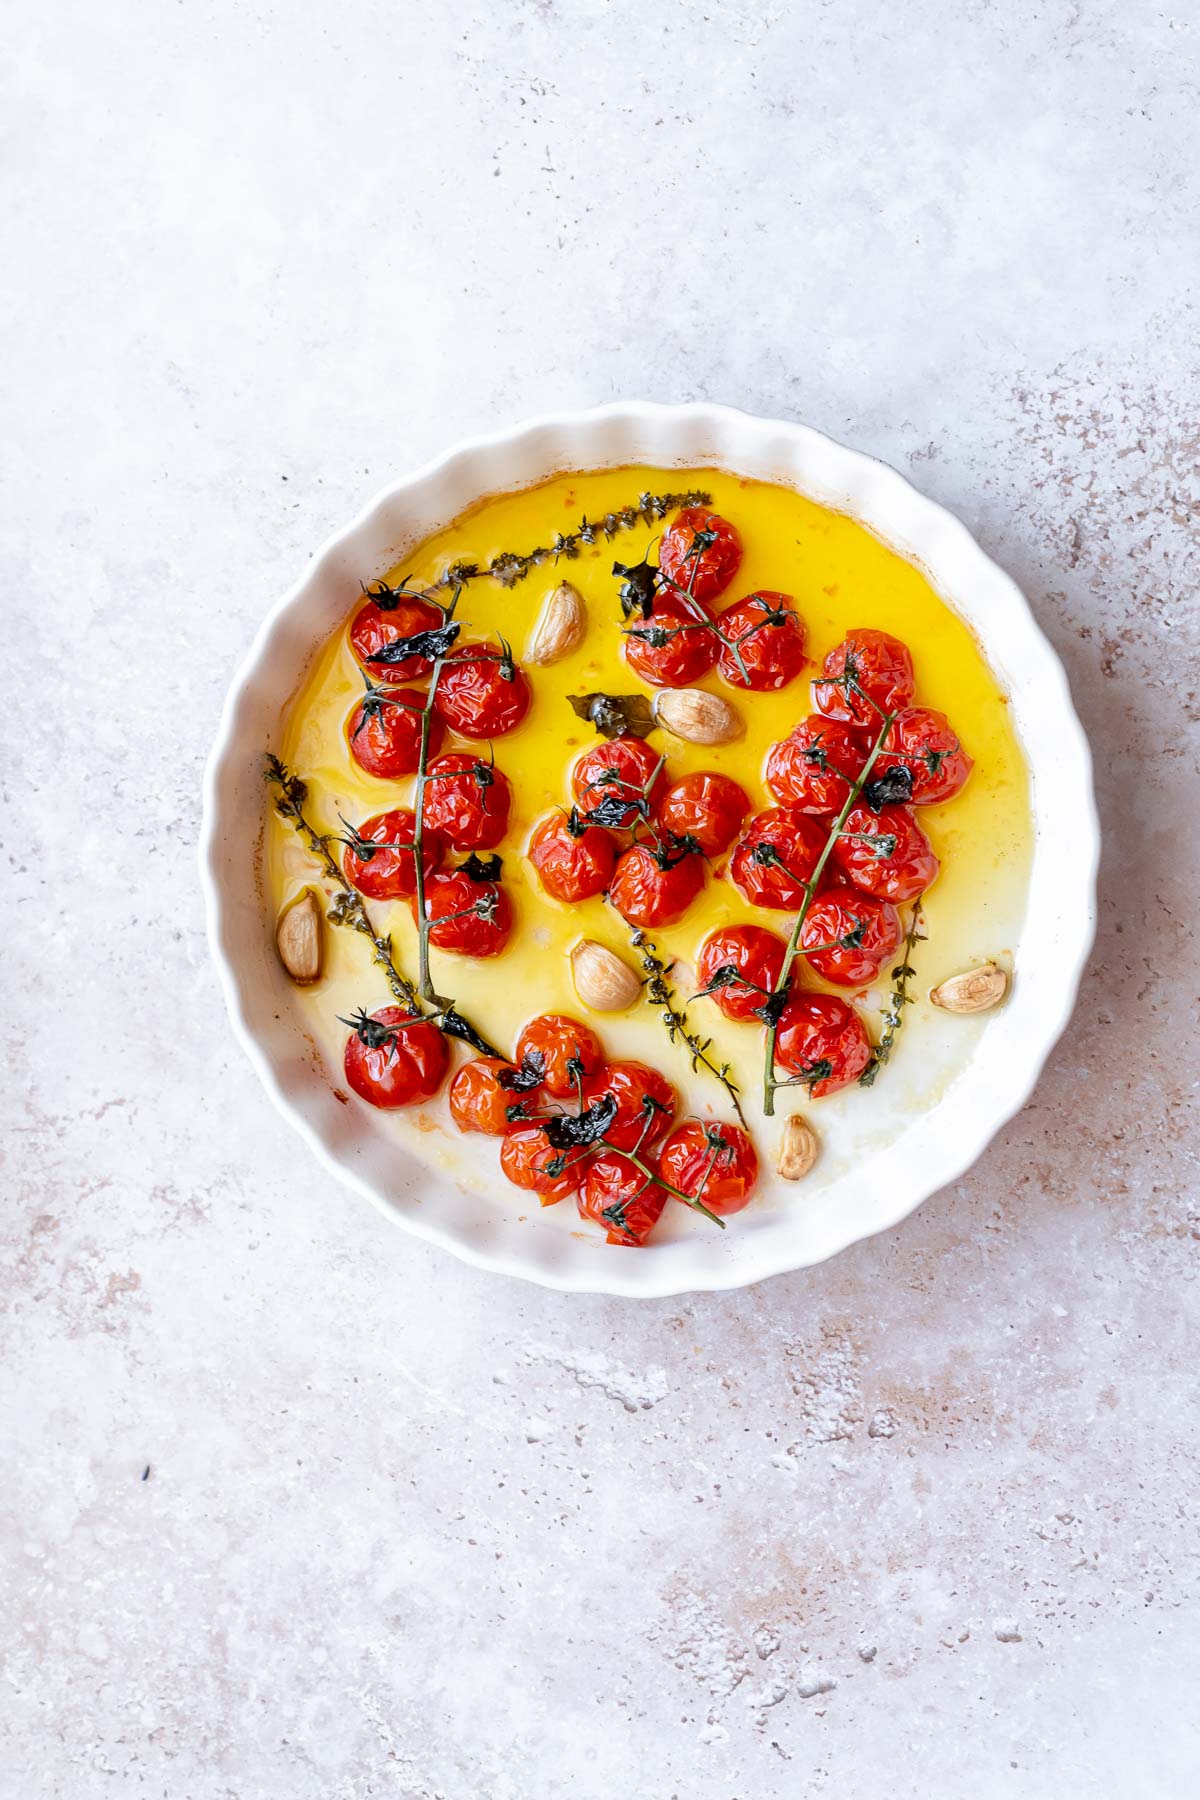 A round white baking dish filled with softened cherry tomatoes on the vine, golden garlic cloves and green herbs.